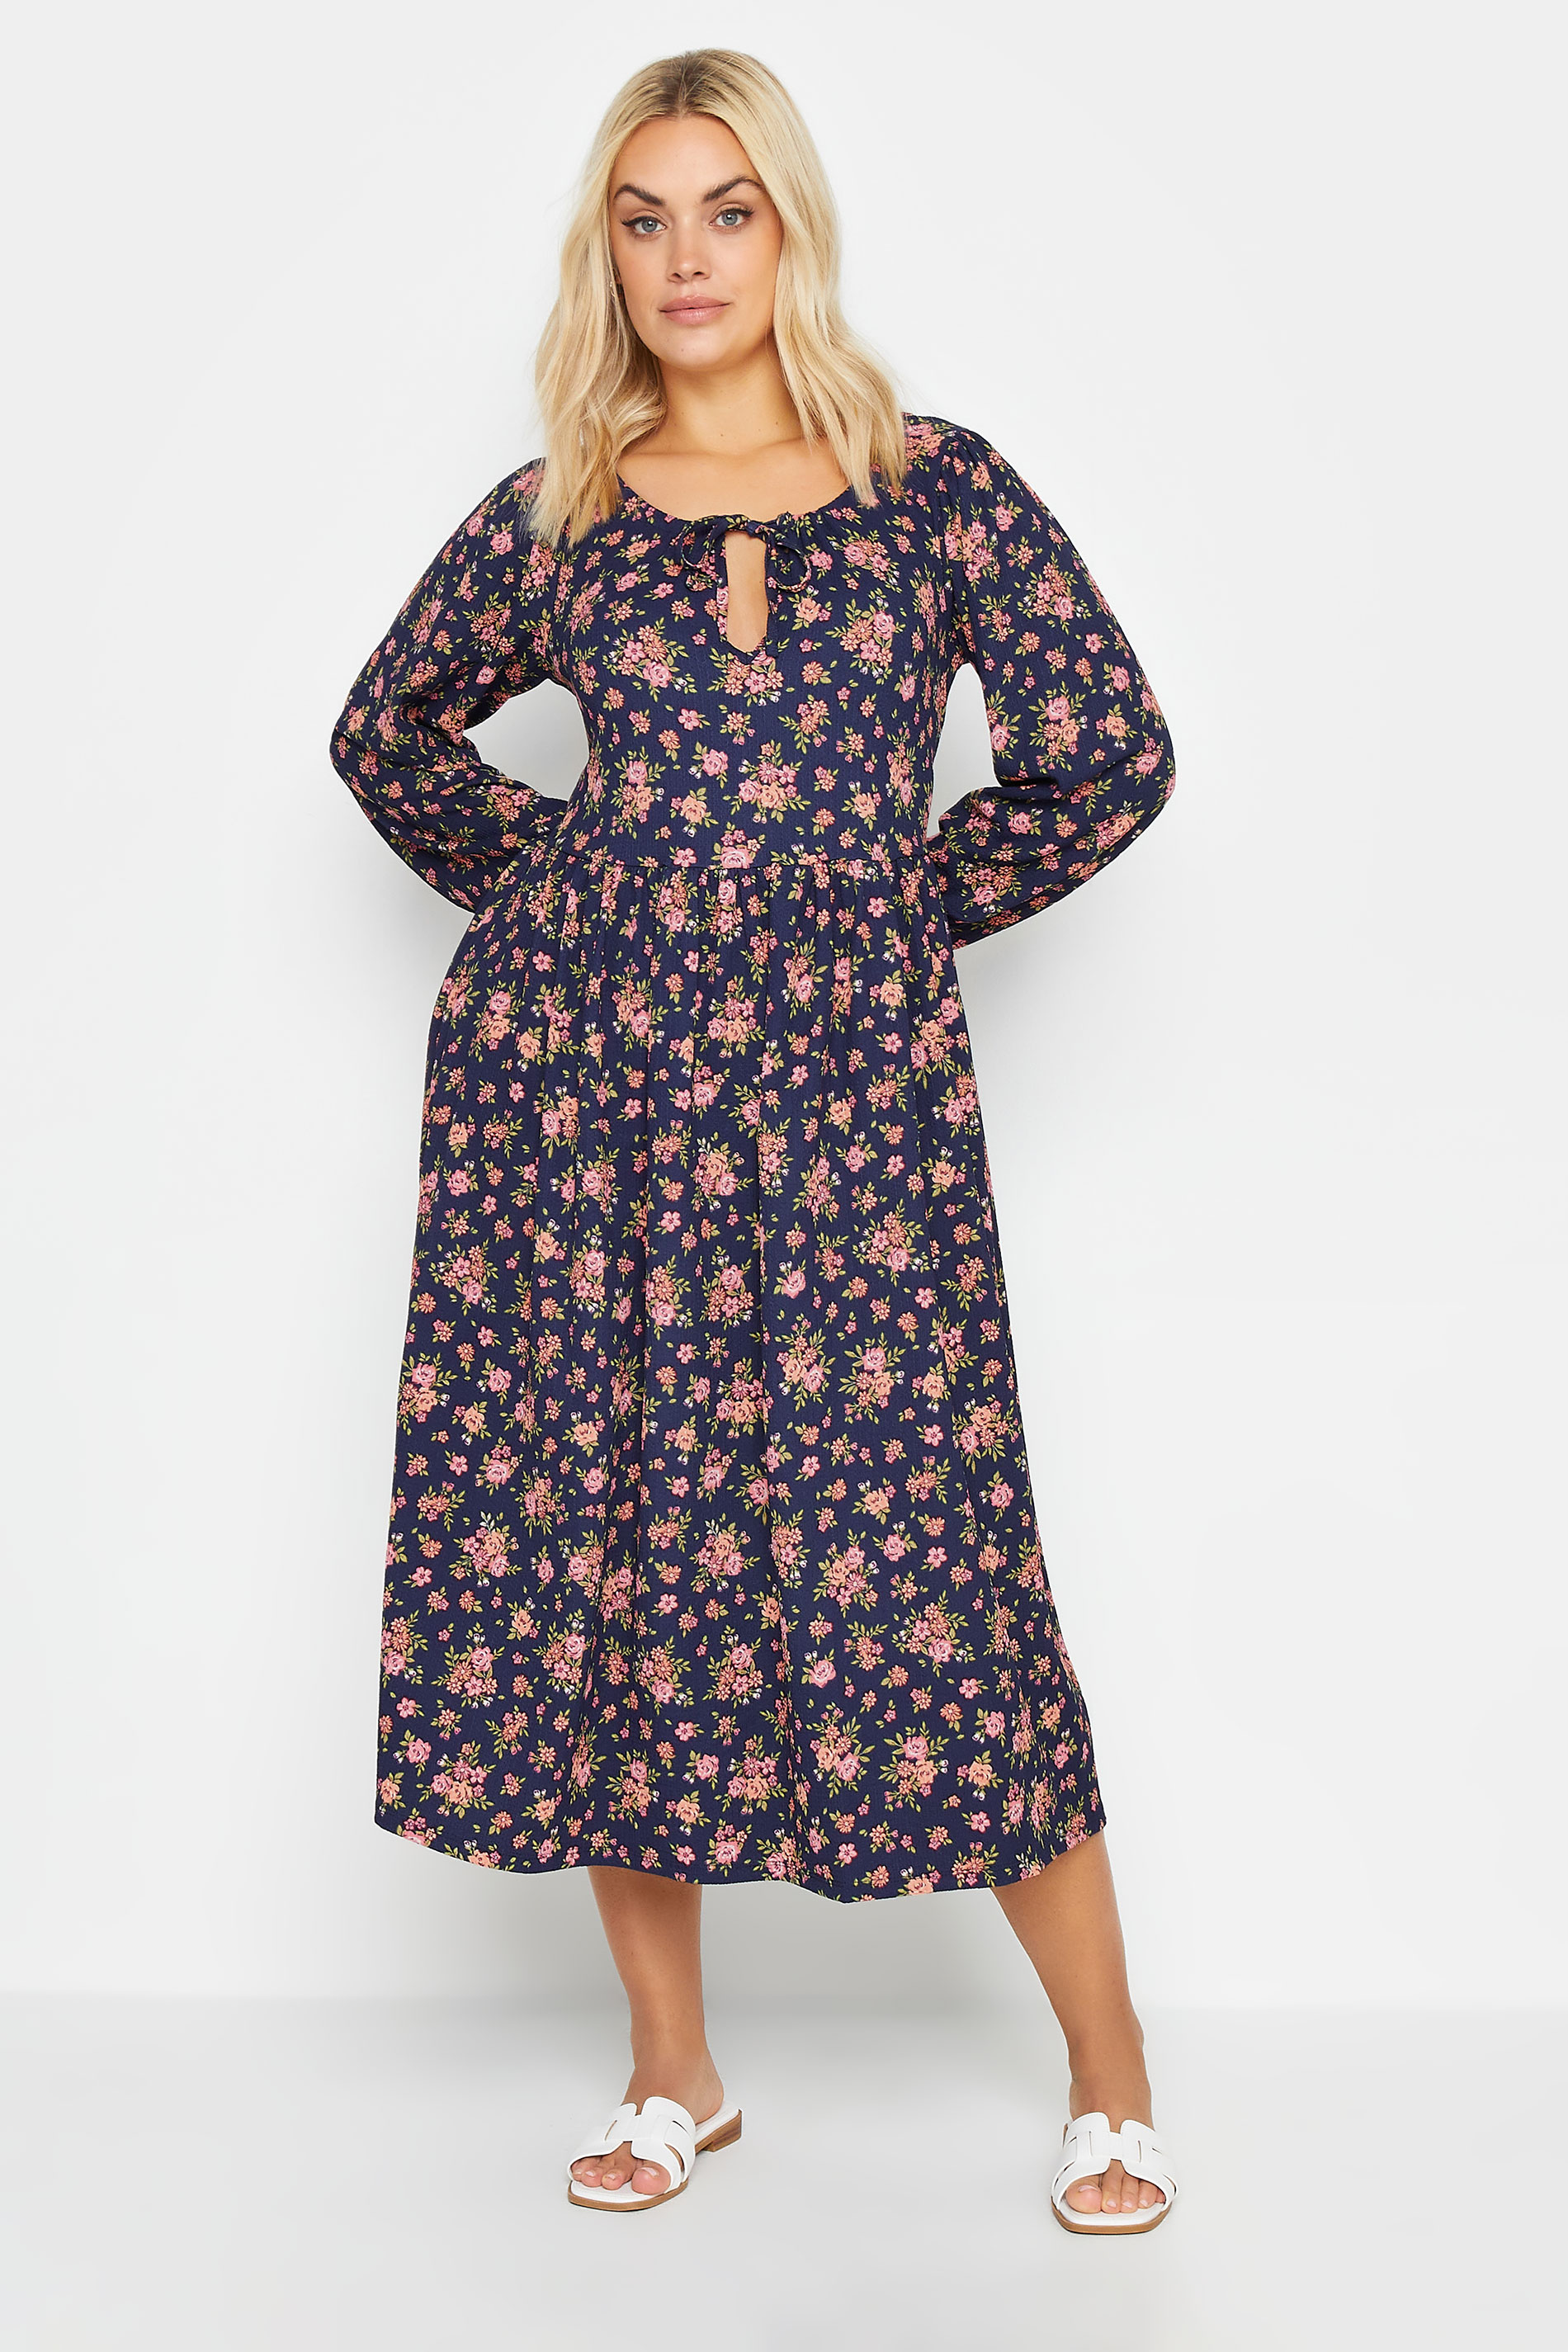 YOURS Plus Size Navy Blue Floral Print Textured Midaxi Dress | Yours Clothing 1